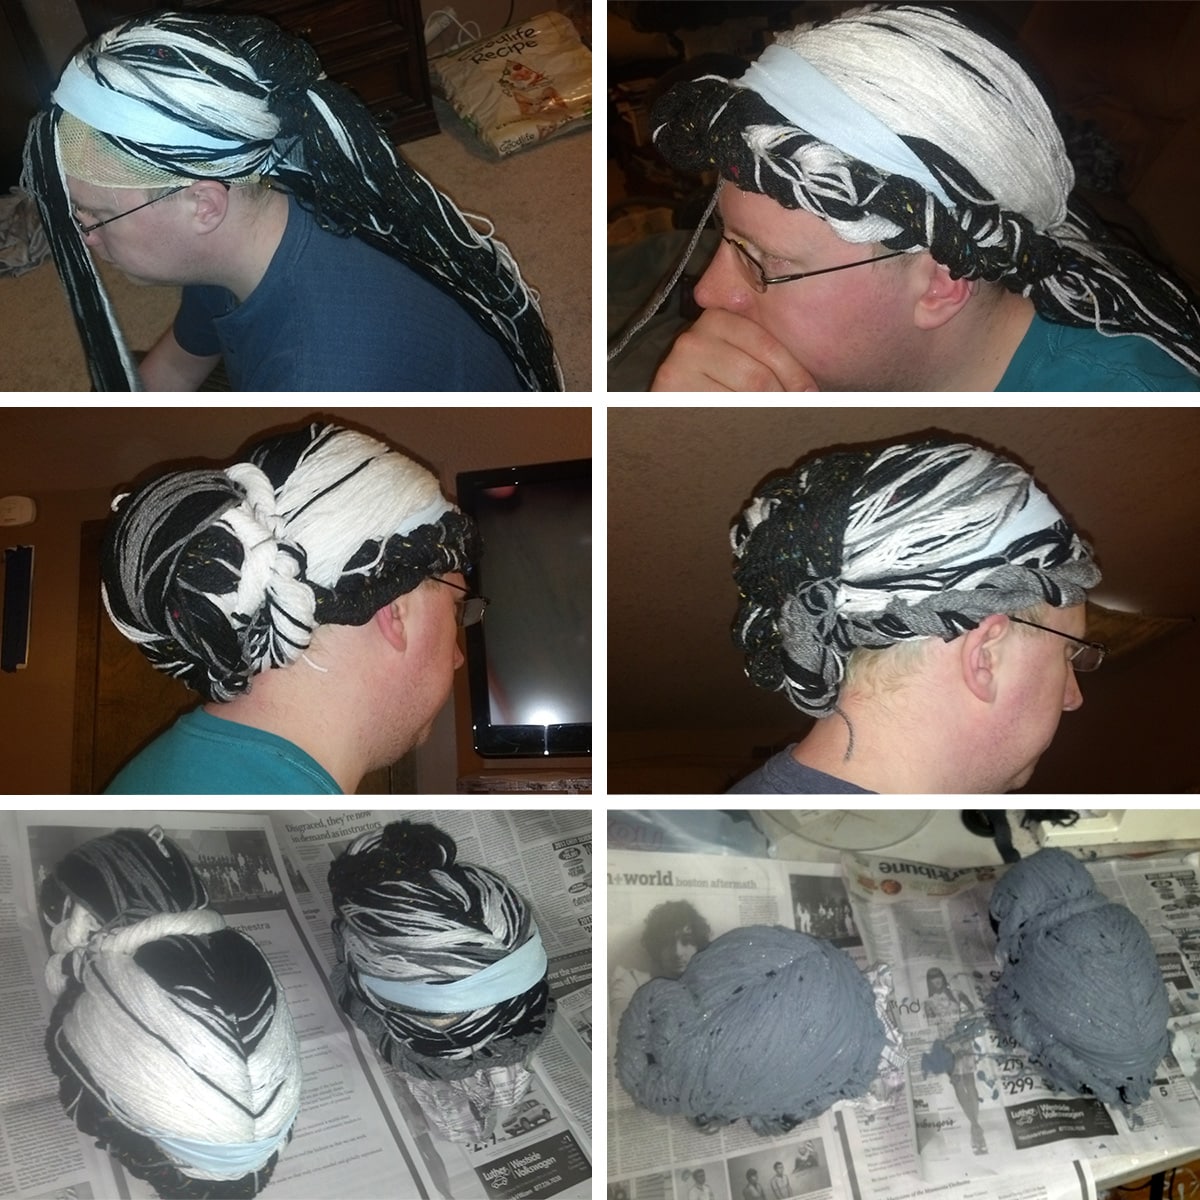 A 6 part image showing the yarn wig being made and painted, as described in the post.